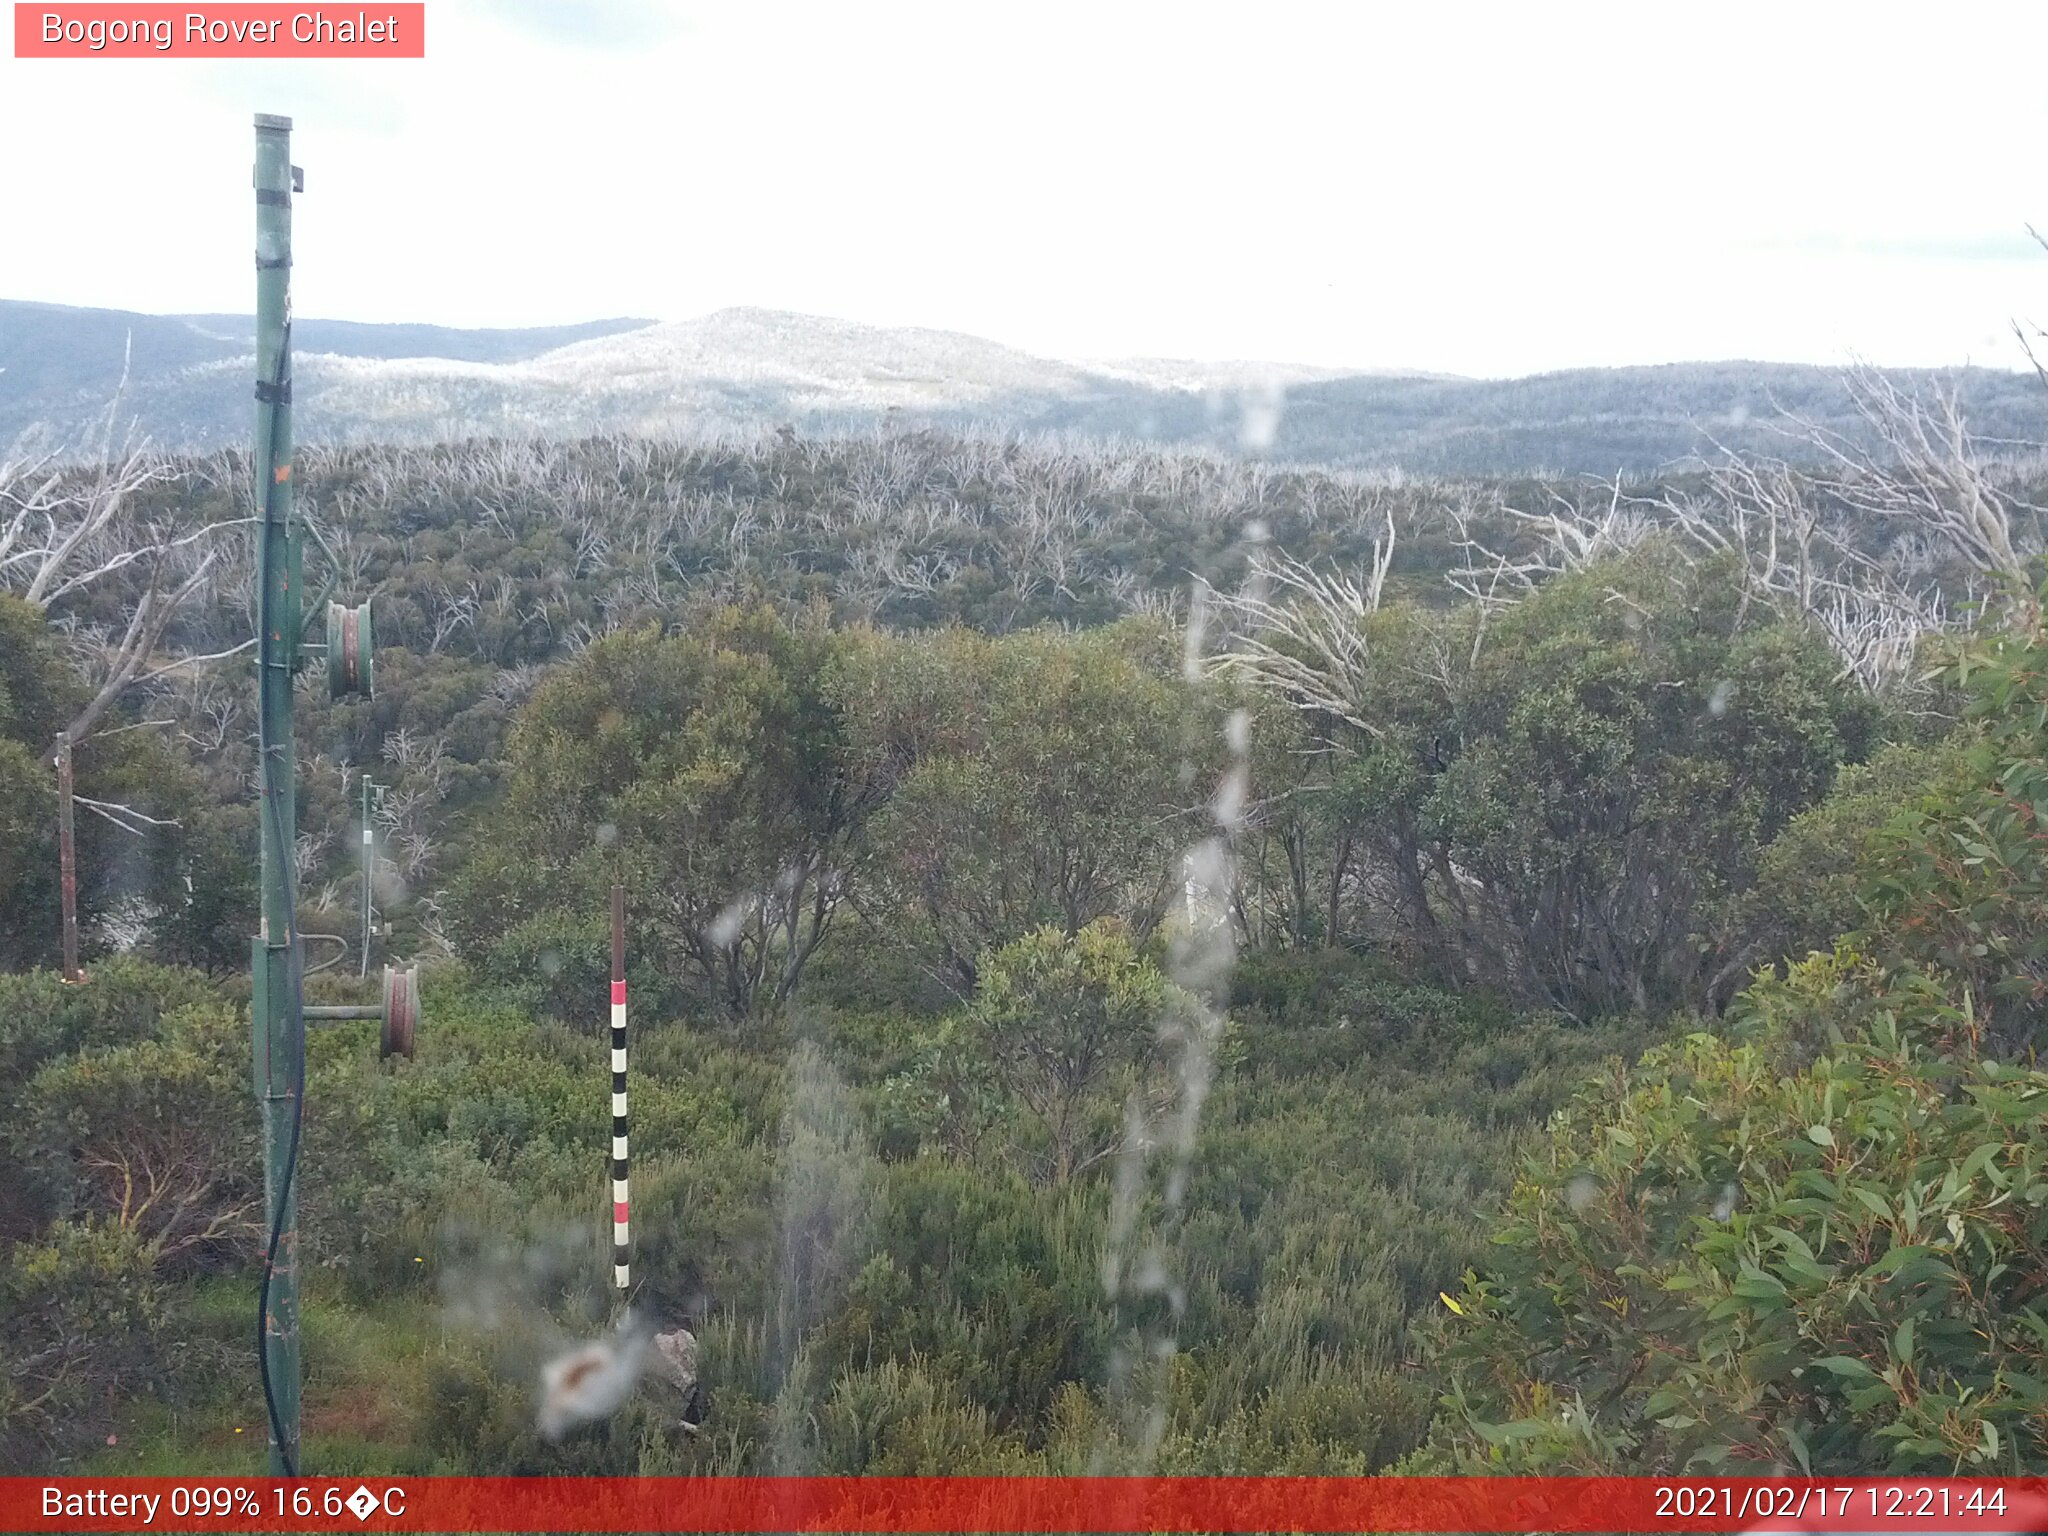 Bogong Web Cam 12:21pm Wednesday 17th of February 2021